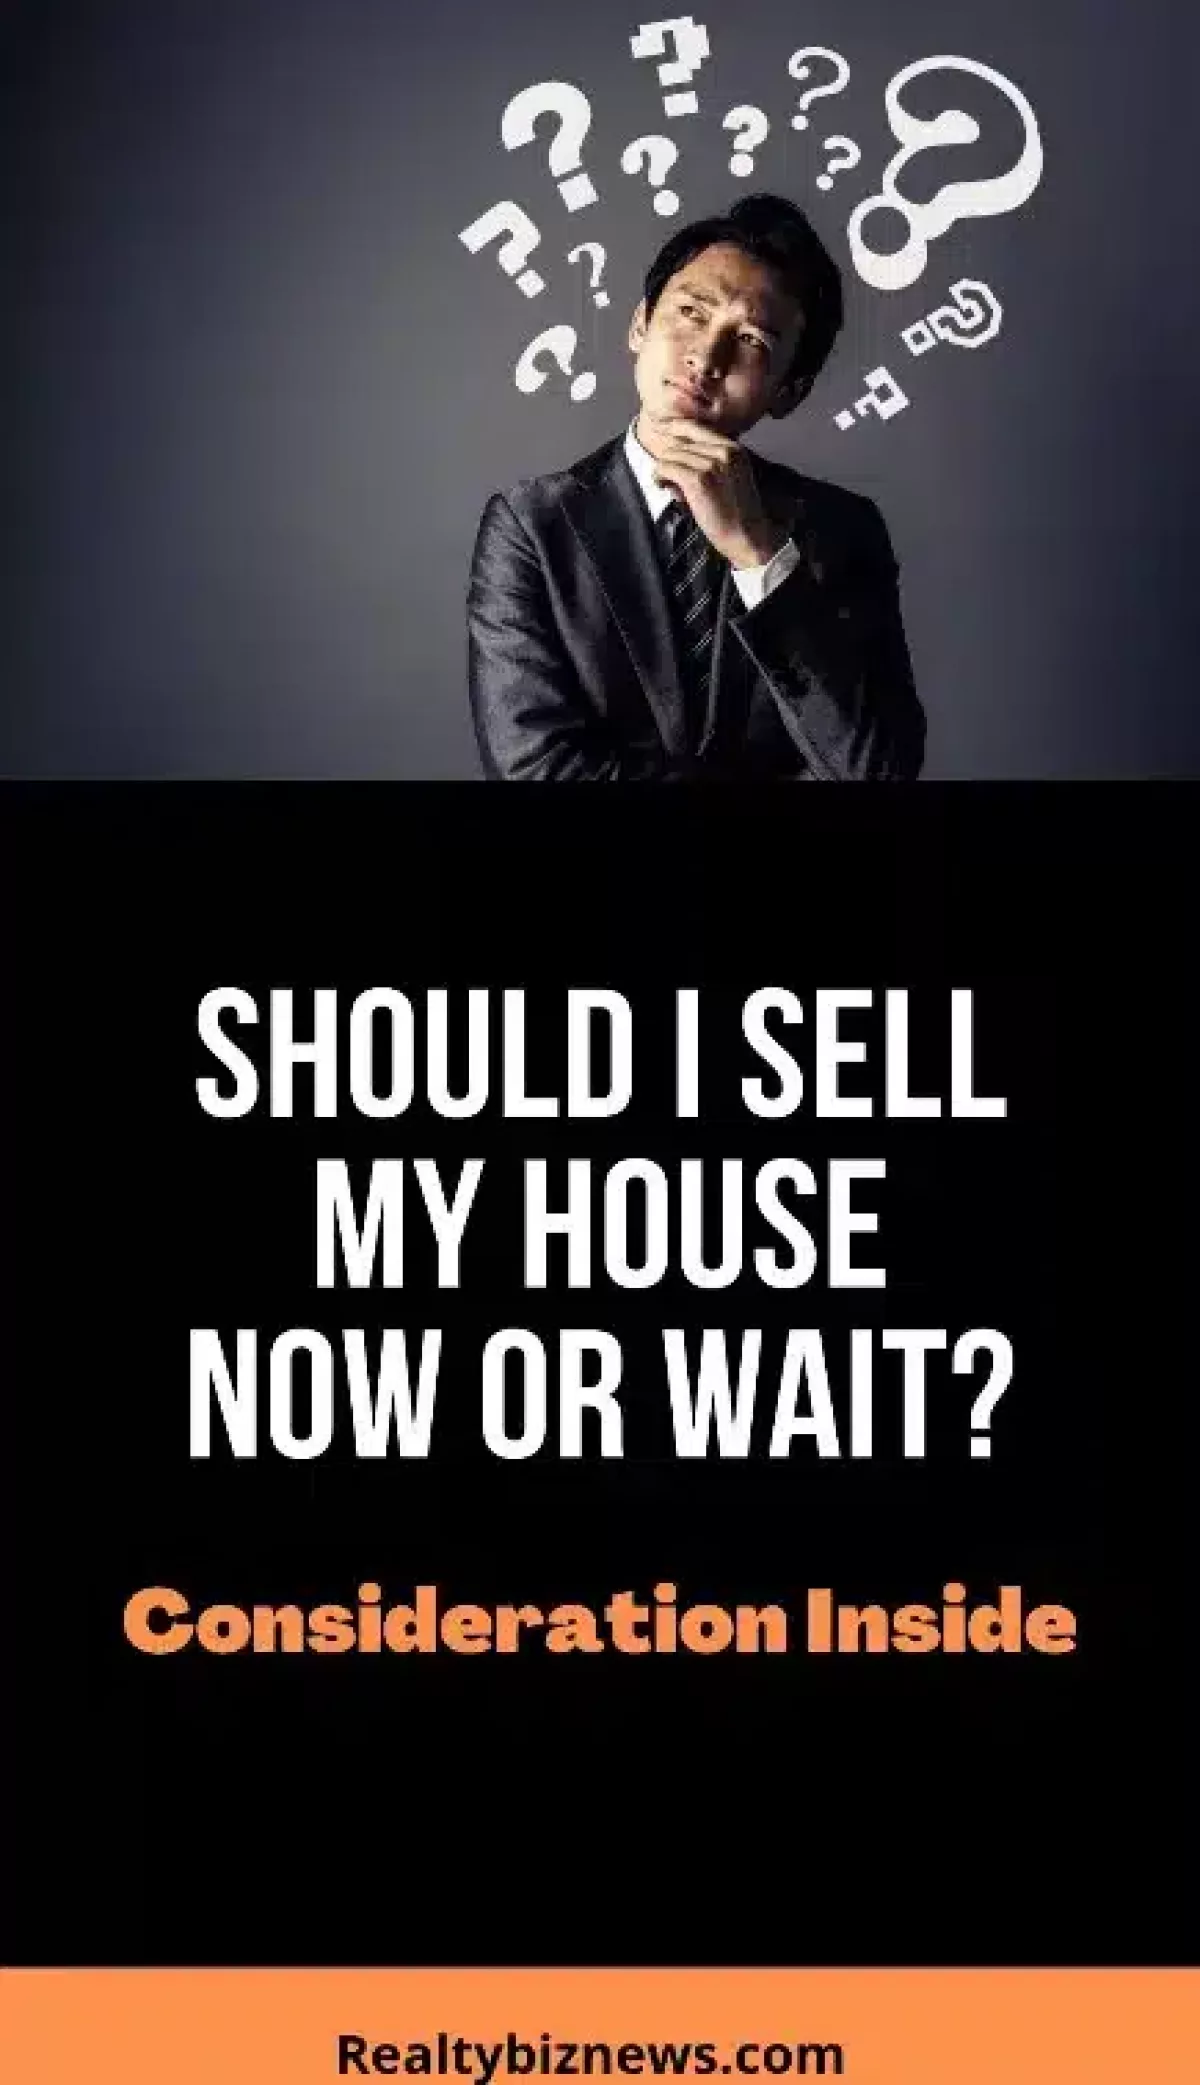 Should I Sell My House Now Or Wait?